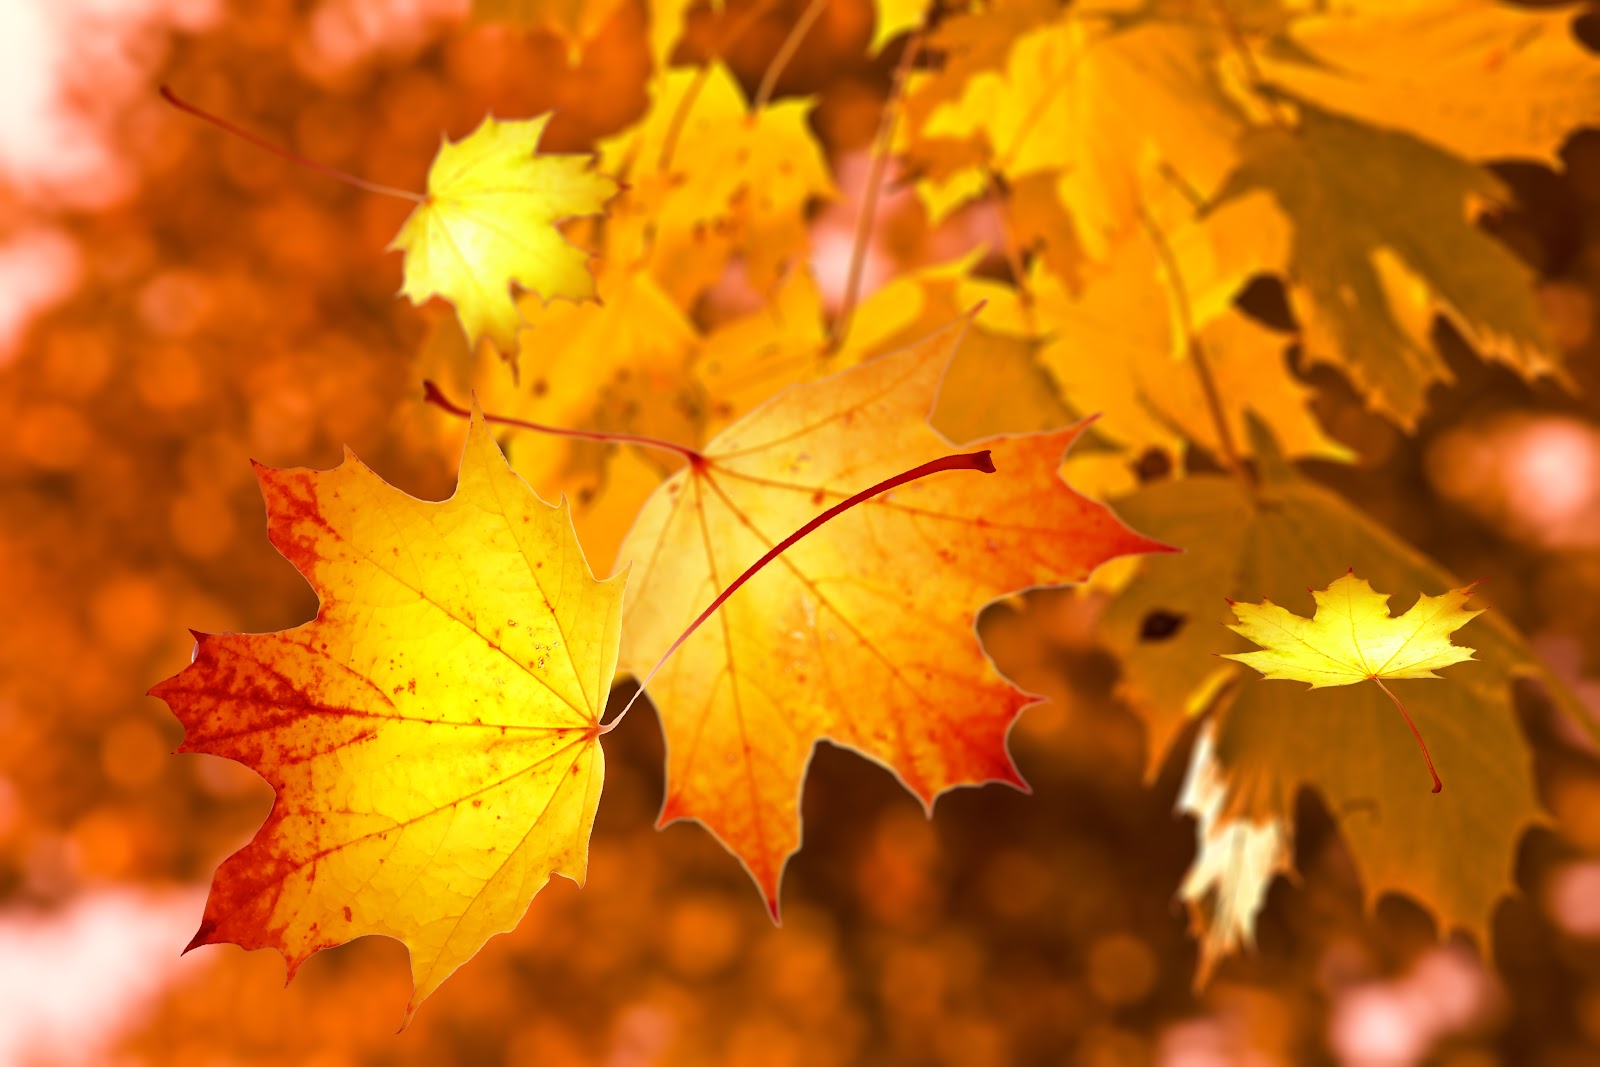 https://get.pxhere.com/photo/autumn-leaves-nature-maple-leaf-leaf-yellow-deciduous-sunlight-maple-tree-tree-branch-computer-wallpaper-1418157.jpg